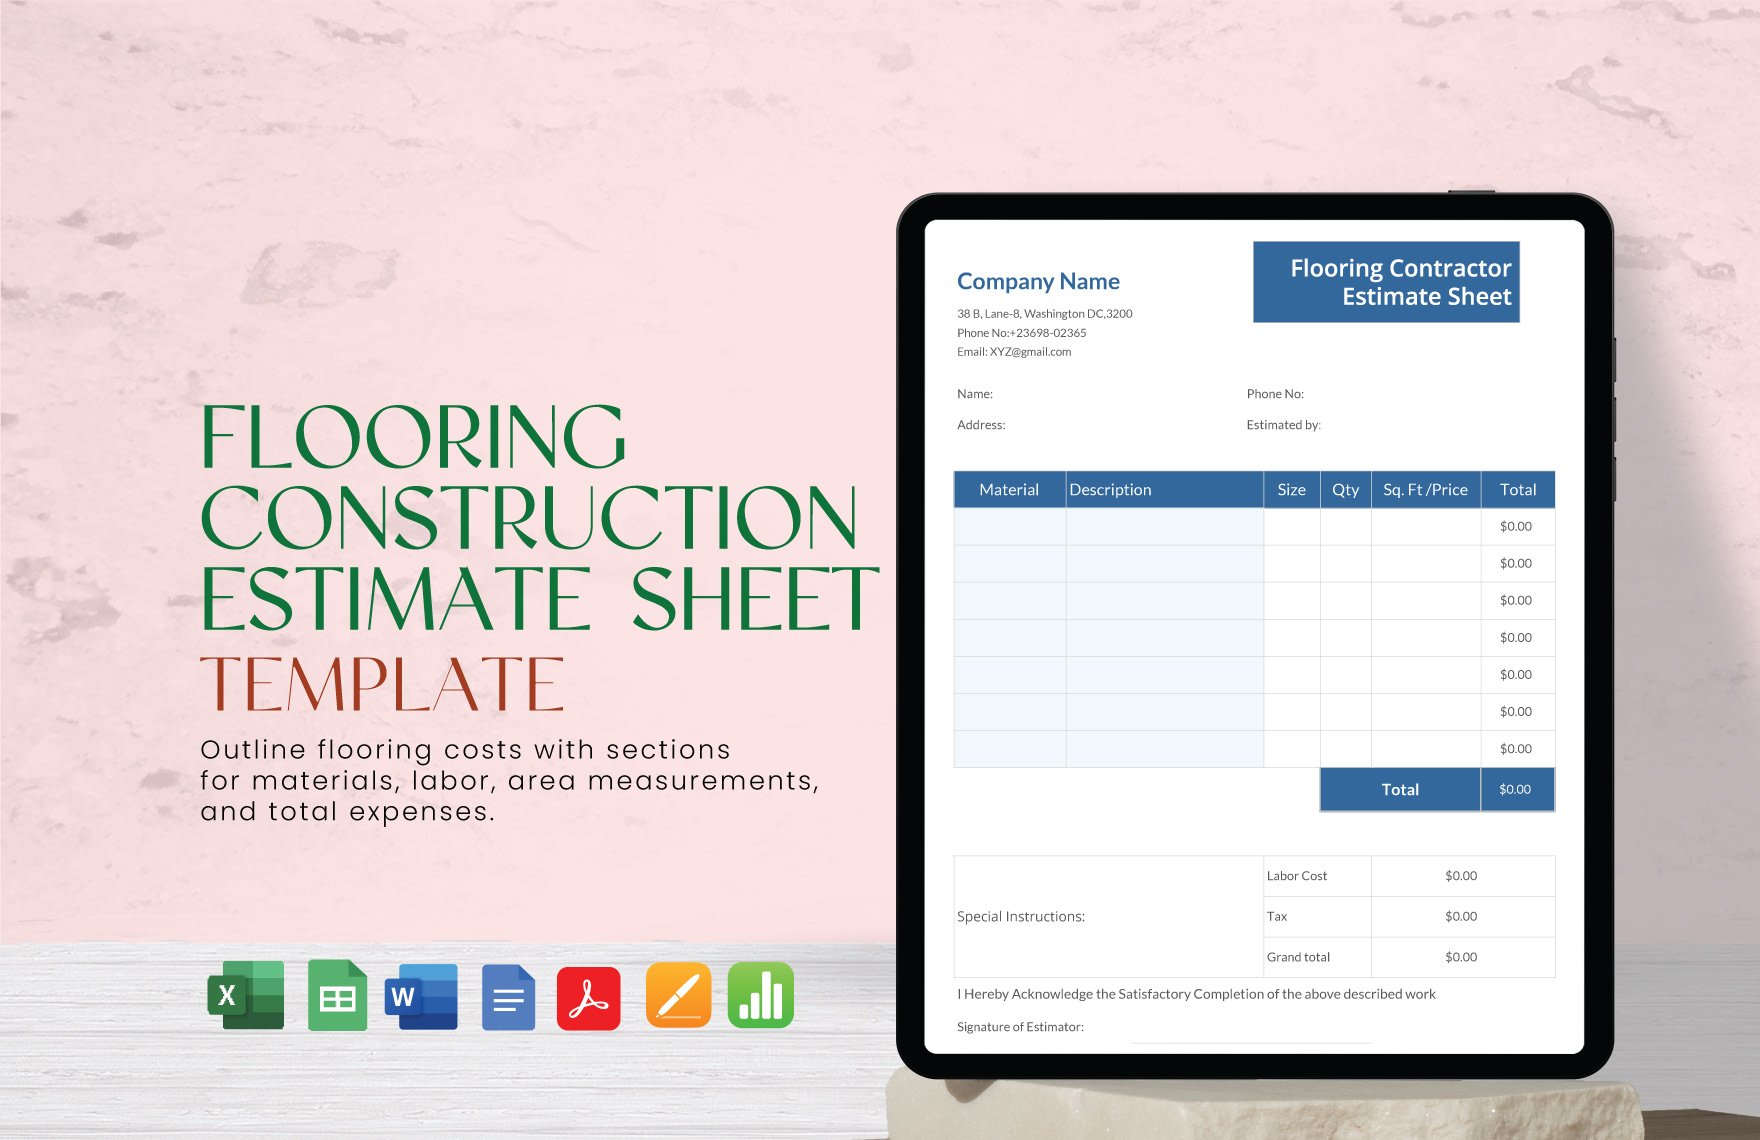 Flooring Contractor Estimate Sheet Template in Word, Google Docs, Excel, PDF, Google Sheets, Apple Pages, Apple Numbers